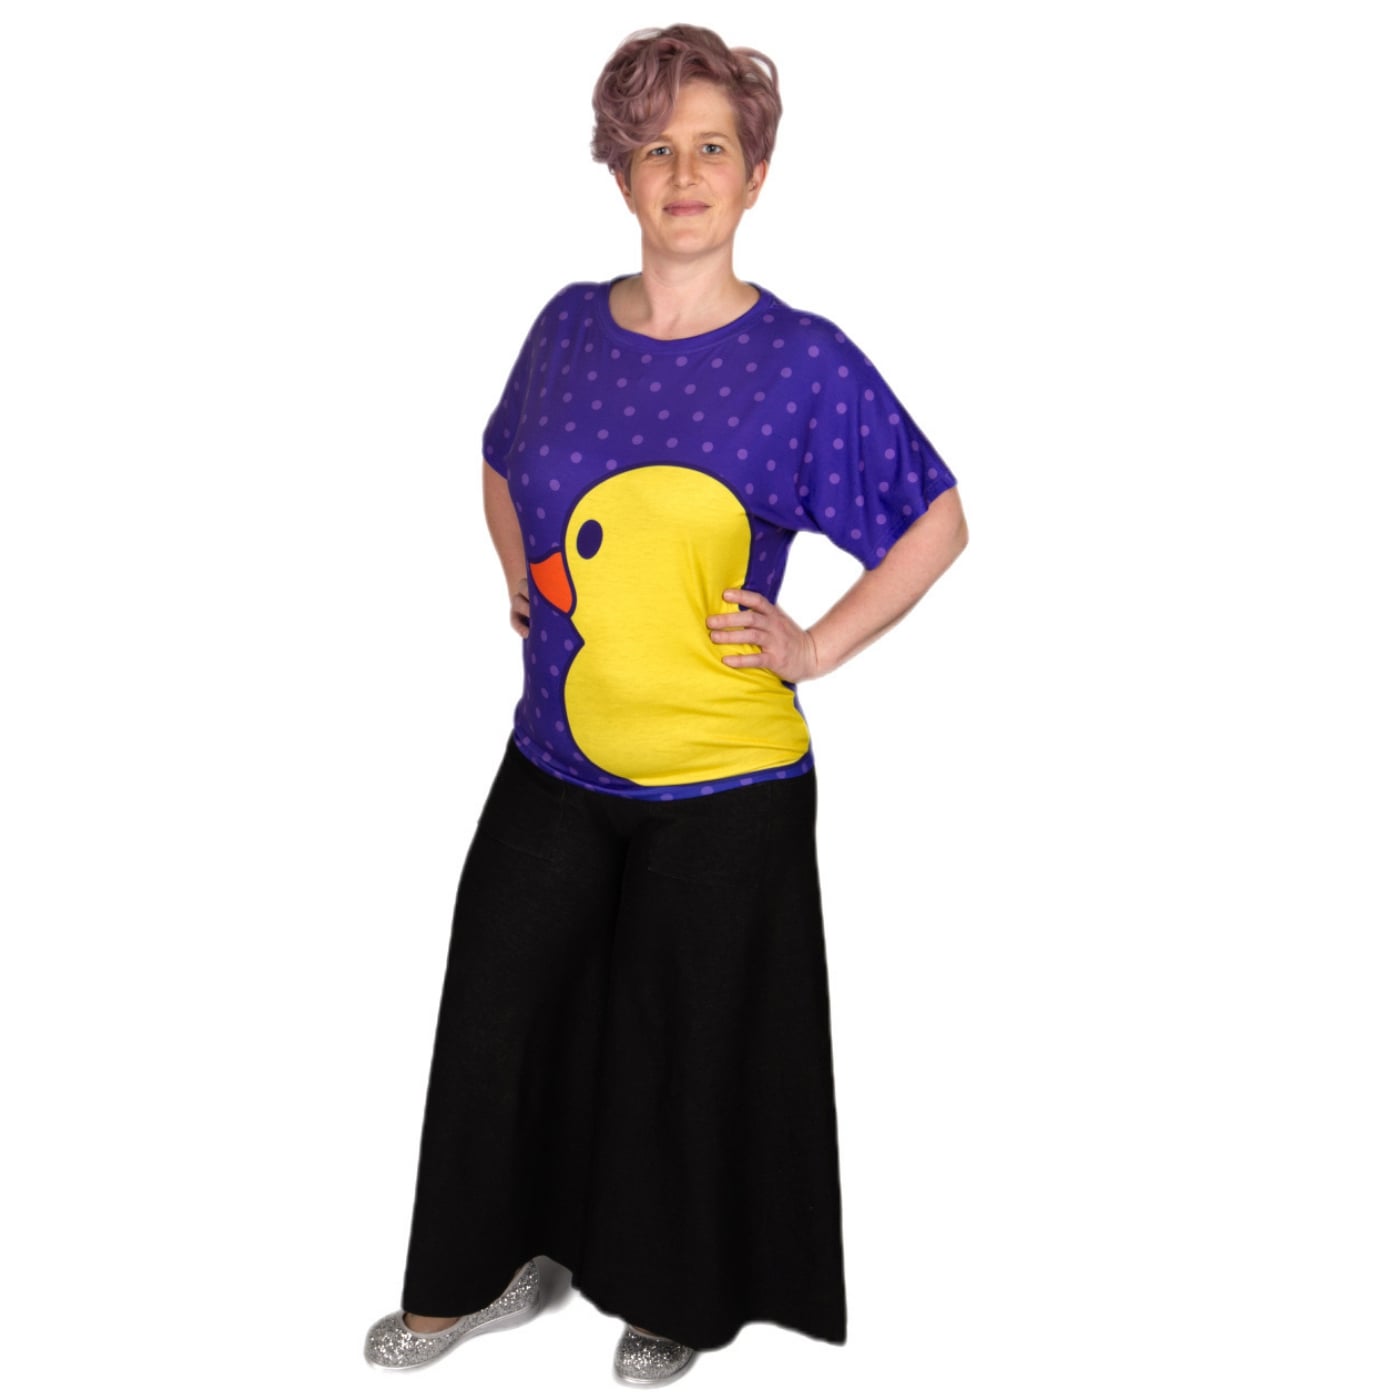 Yellow Ducky Batwing Top by RainbowsAndFairies.com.au (Yellow Duck - Rubber Duck - Ducky - Purple - Vintage Inspired - Kitsch - Knit Top - Mod) - SKU: CL_BATOP_DUCKY_YEL - Pic-06